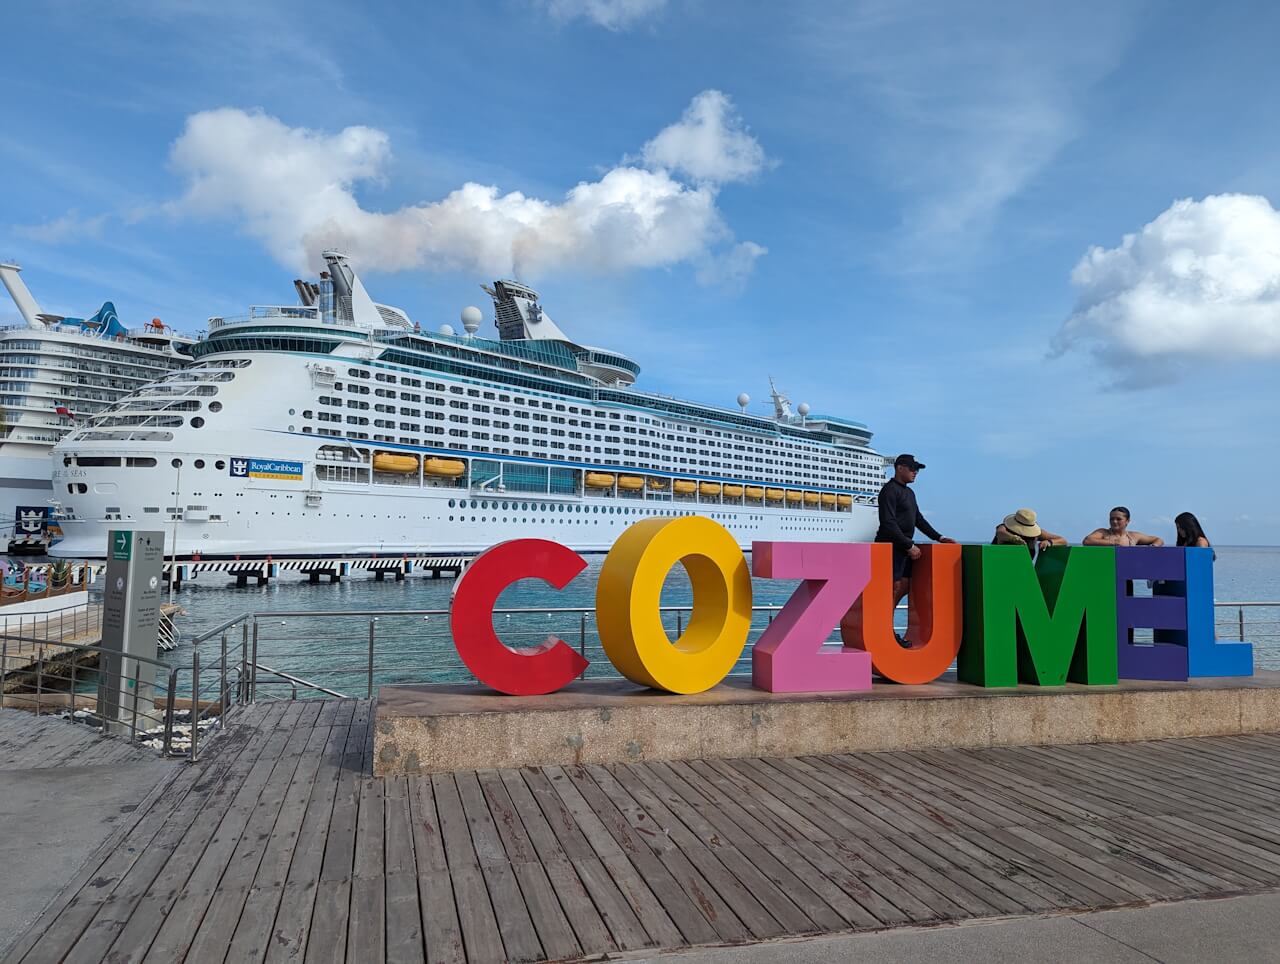 Royal Caribbean Adventure of the Seas in Front of Cozumel sign